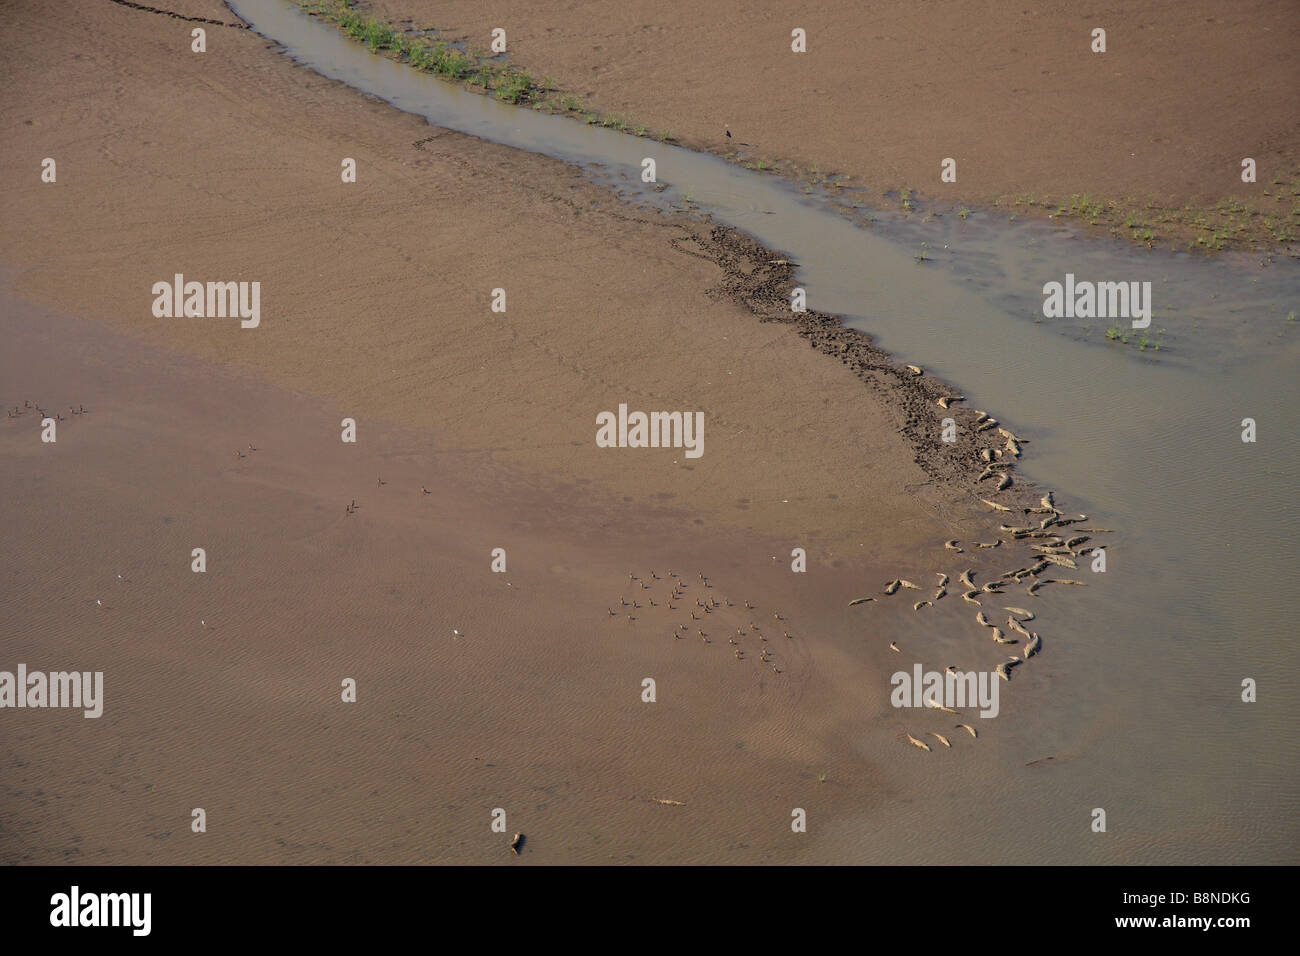 Aerial view of Banzi pan with crocodiles lying on the mud flats sunning themselves Stock Photo